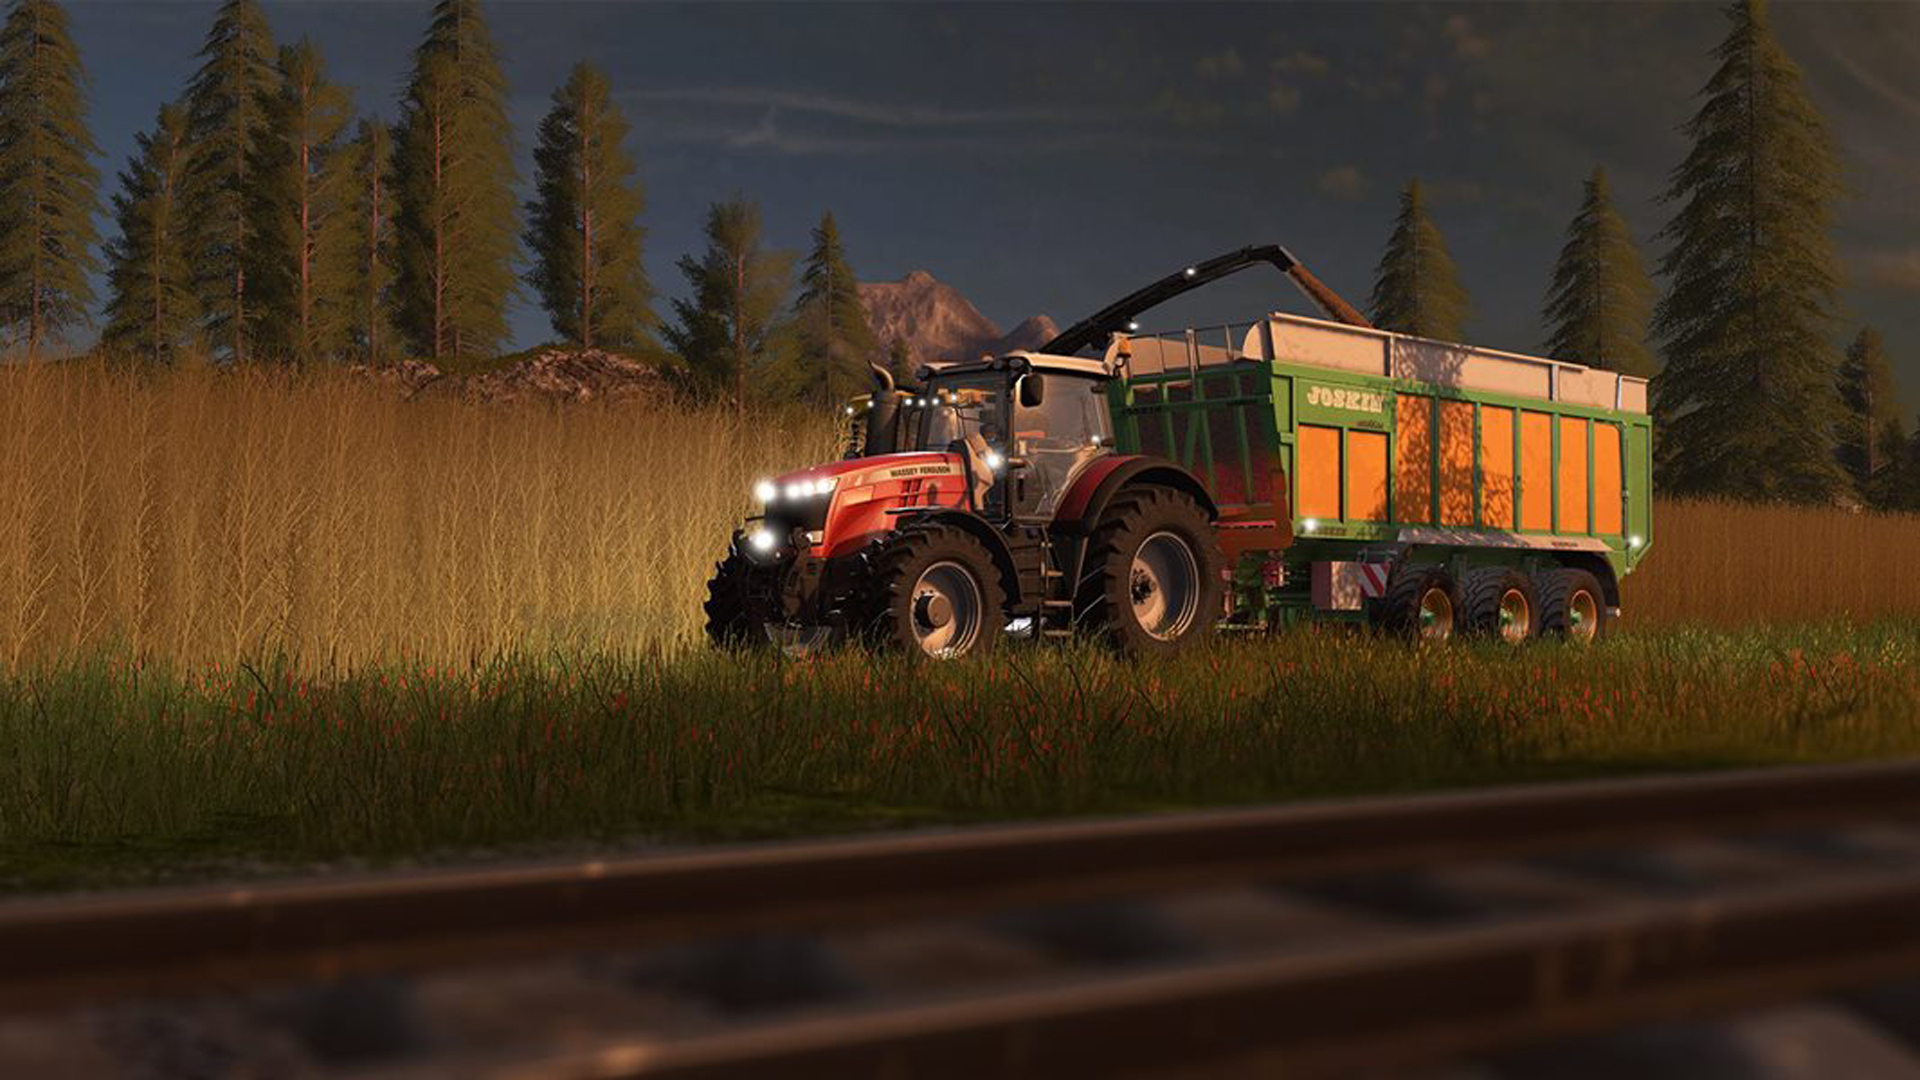 fs17 free game download with all dlc